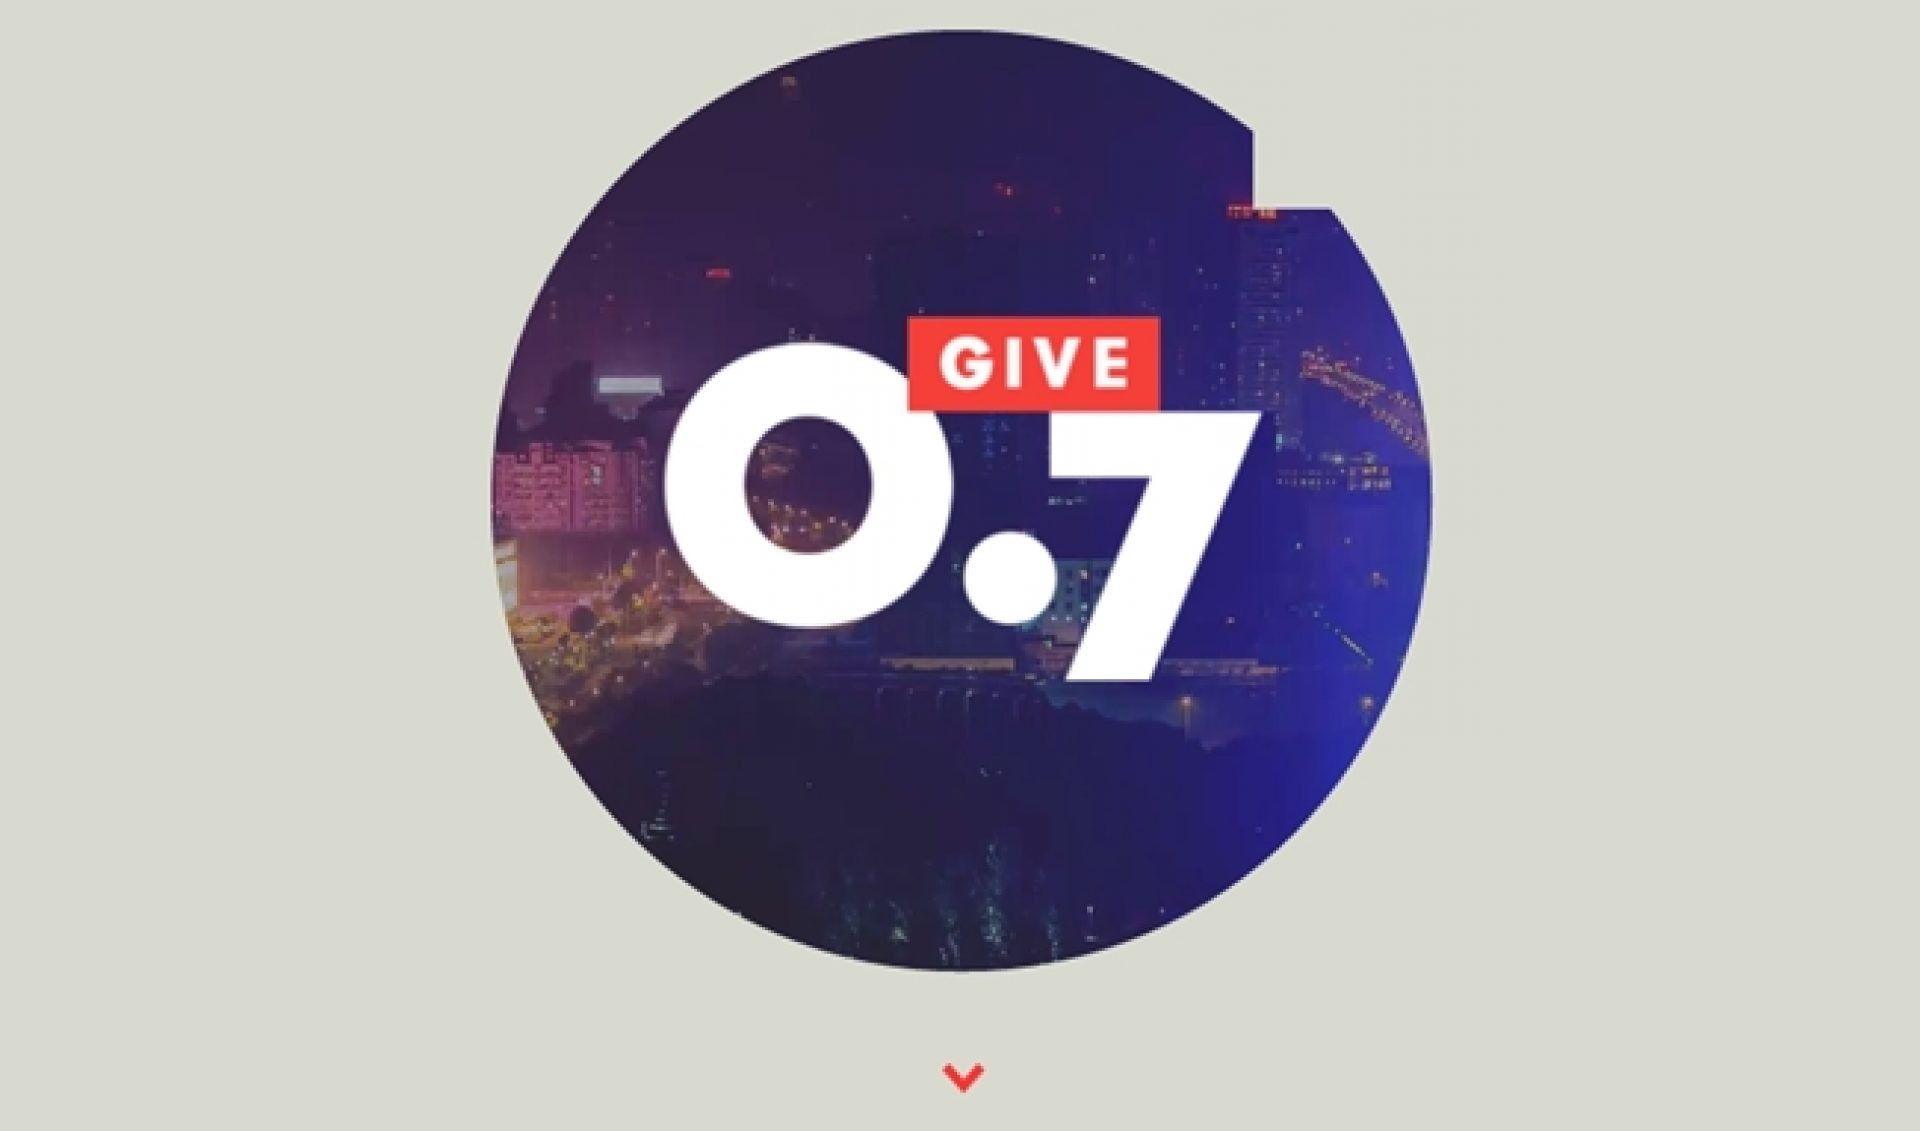 Charity Campaign Urges YouTube Viewers To “Give 0.7%”